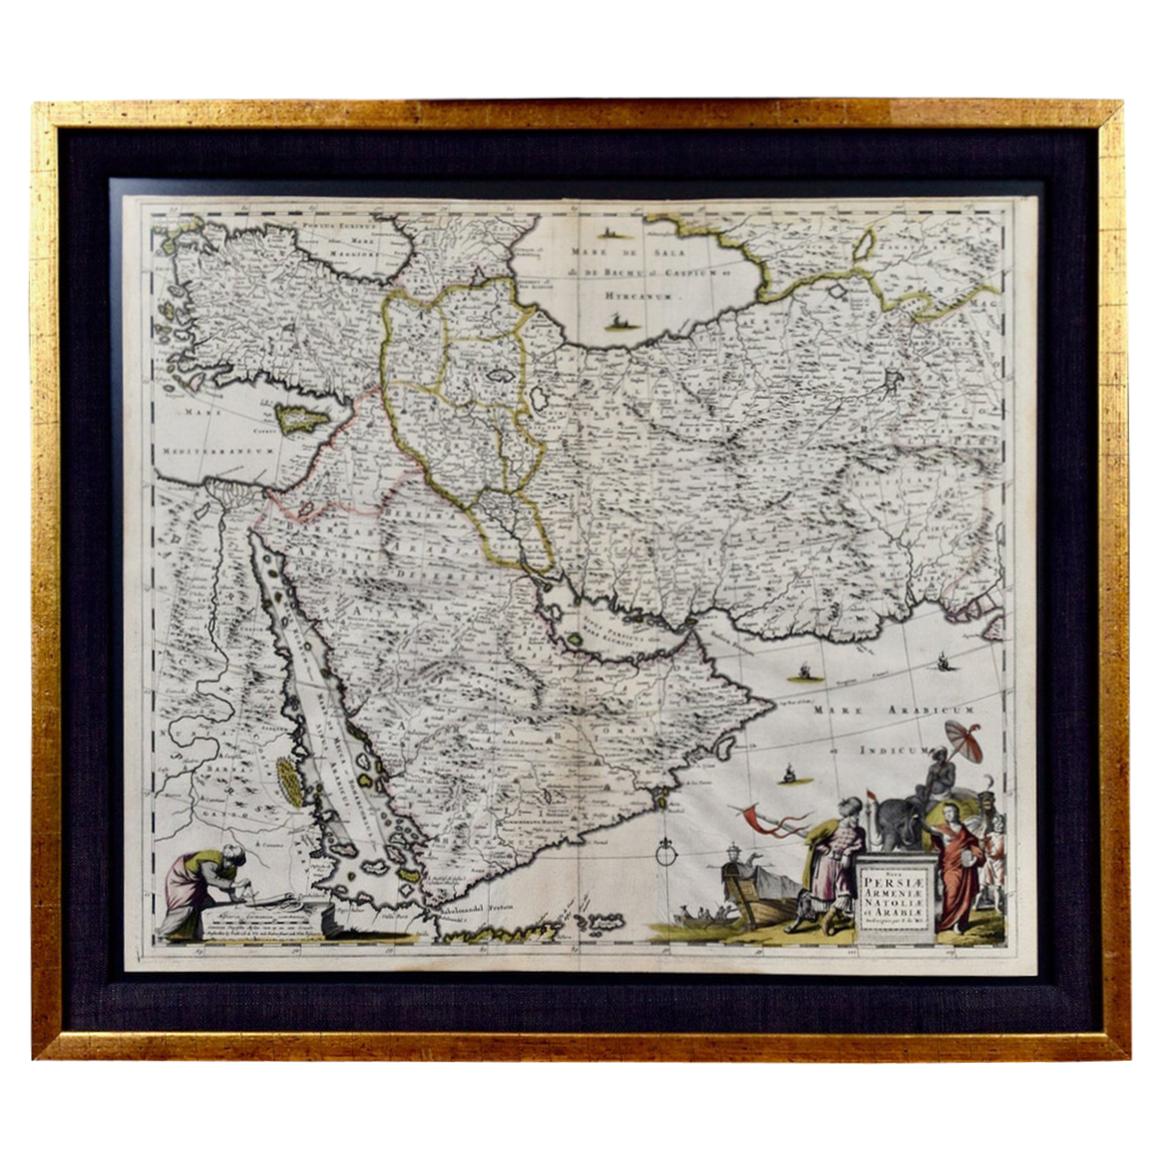 Persia, Armenia & Adjacent Regions: A 17th Century Hand-colored Map by De Wit